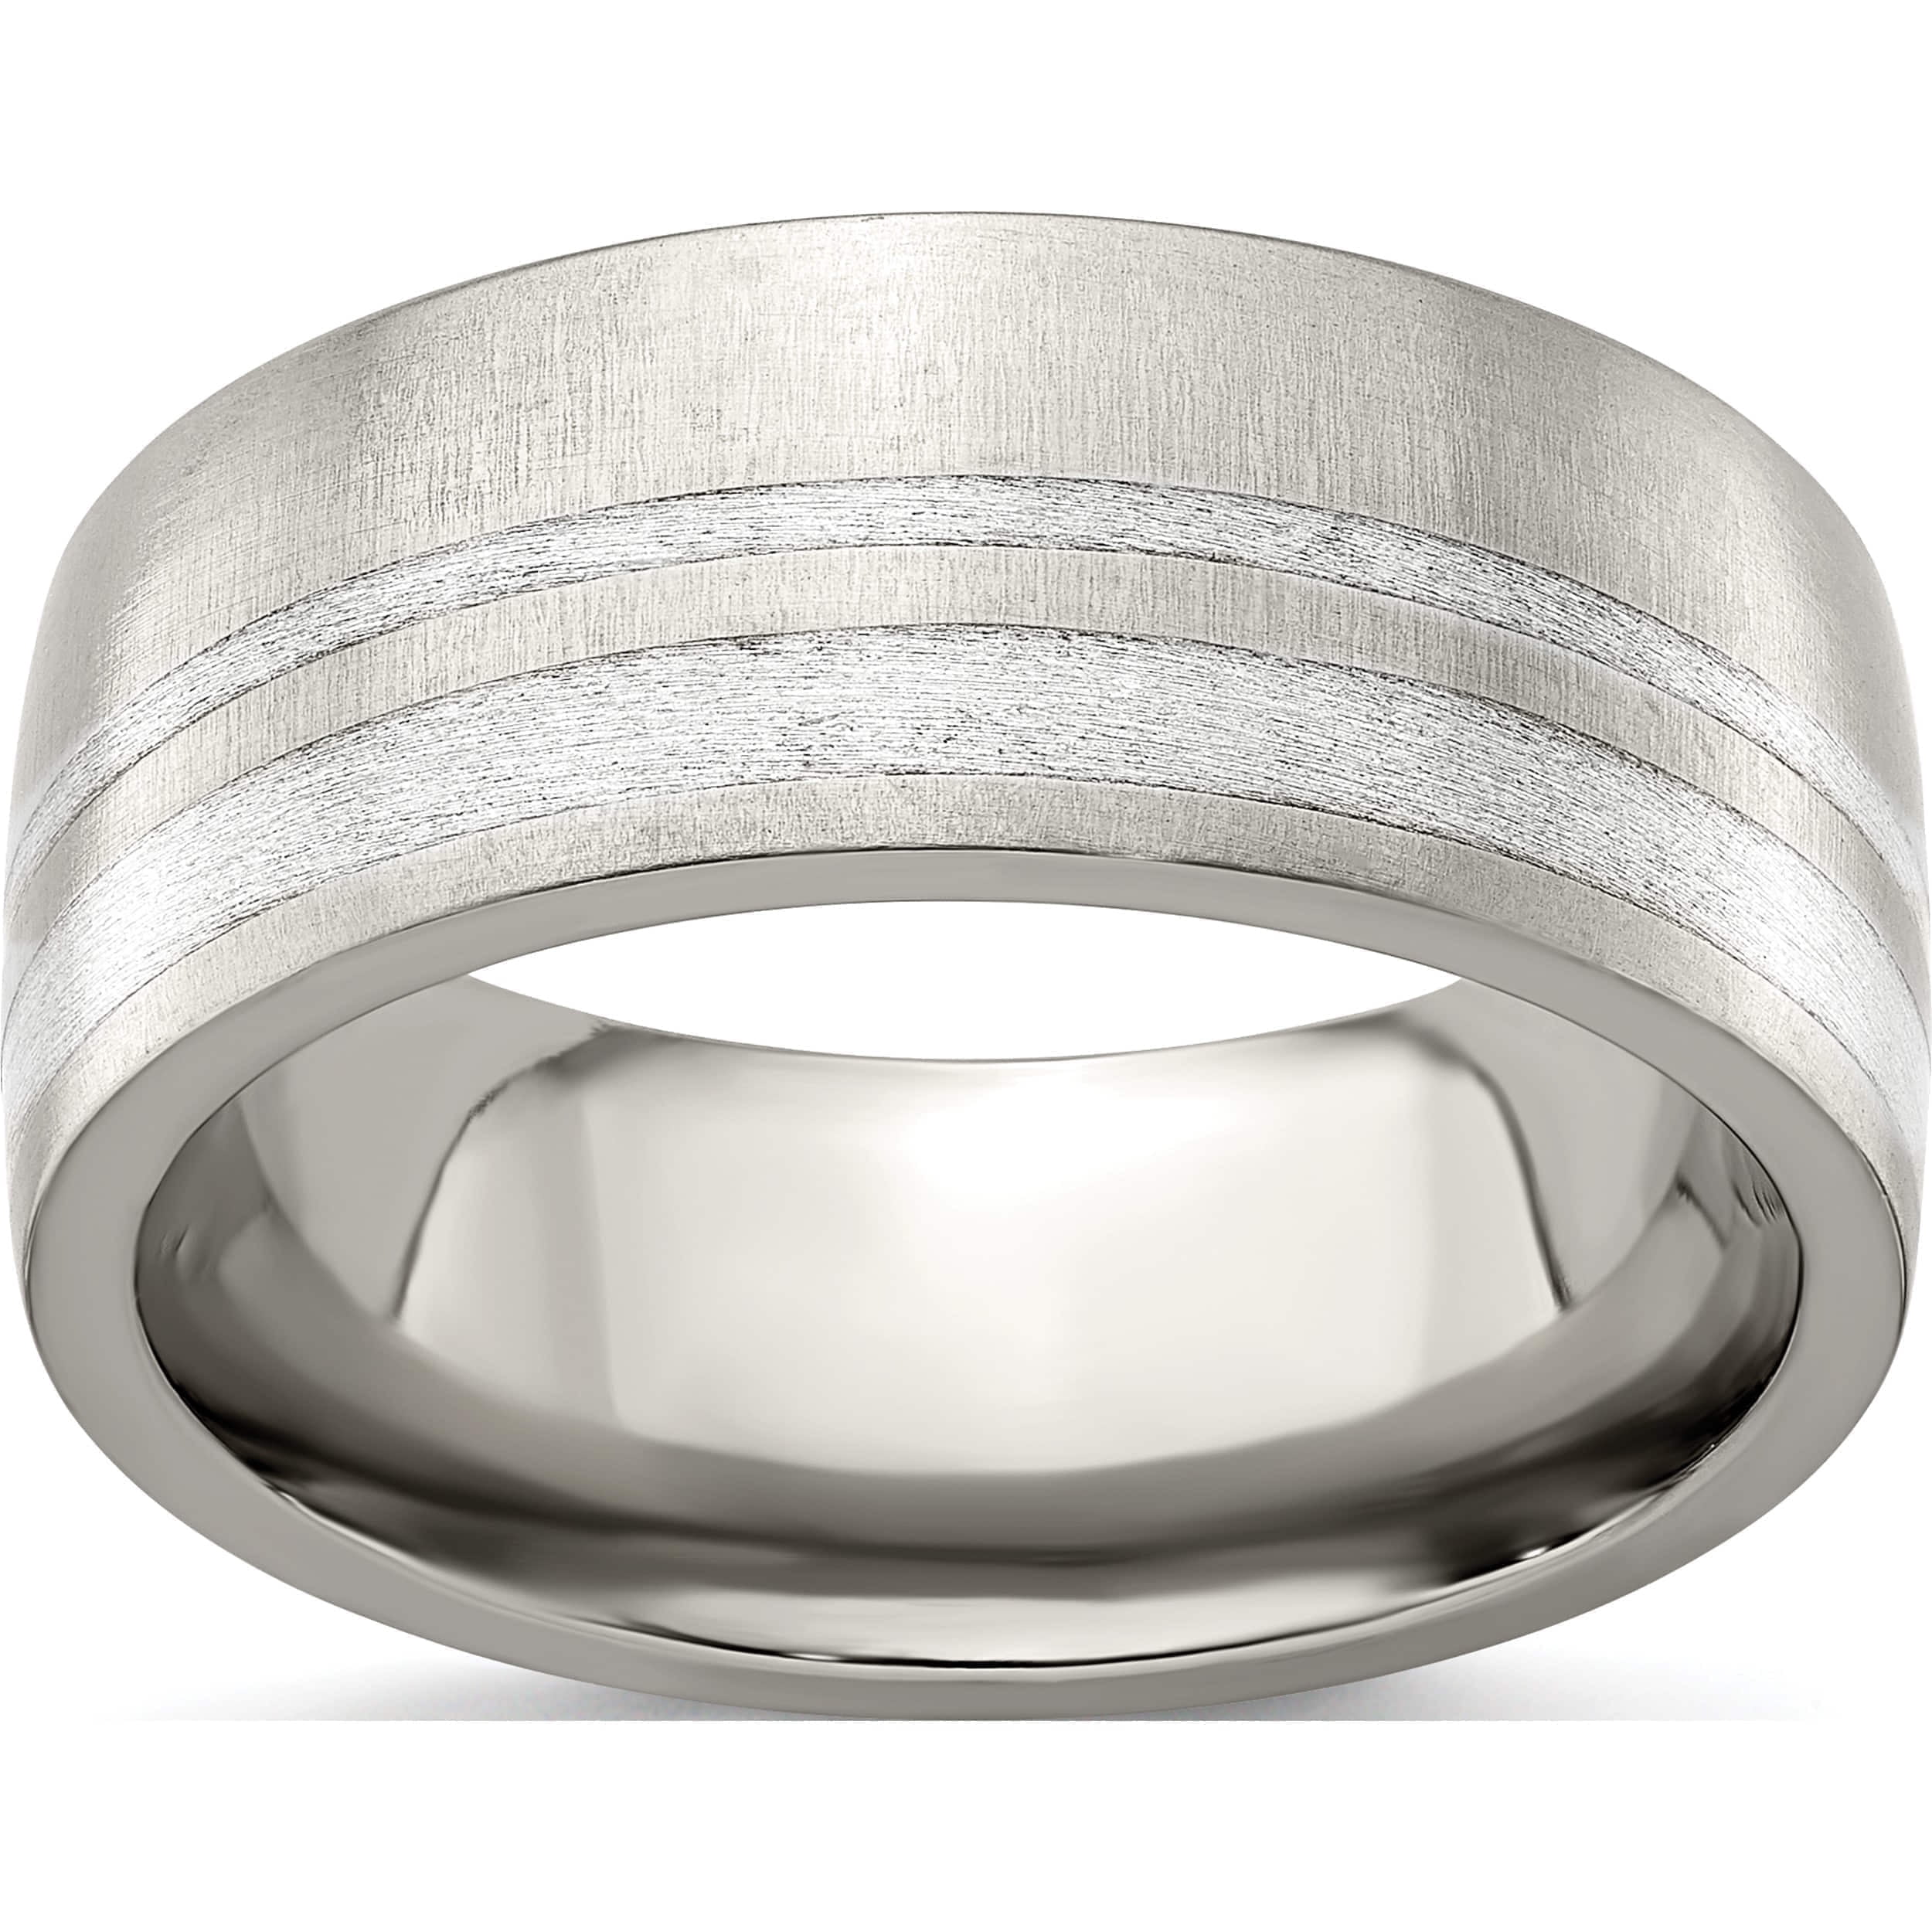 Titanium/Silver Two-Tone Edward Mirell Titanium & Sterling Silver Brushed 9mm Band (Size 9) Made In United States emr266-9